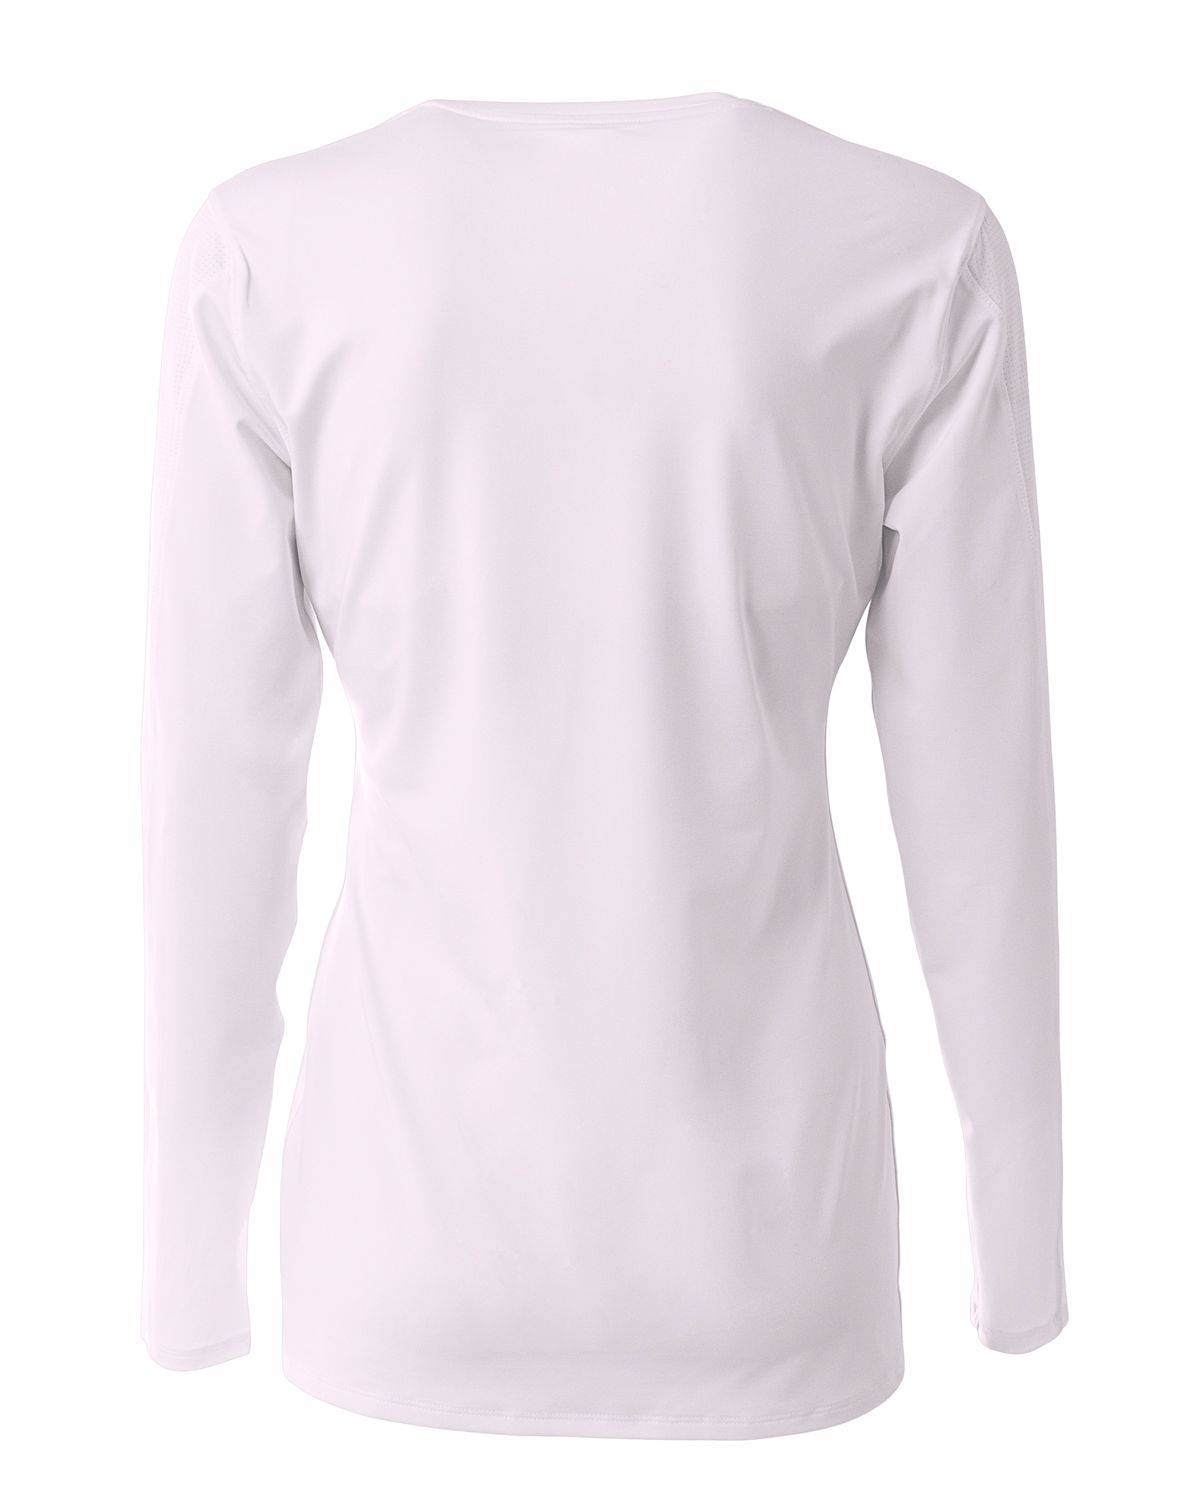 'A4 NW3015 Spike Long Sleeve Volleyball Jersey'